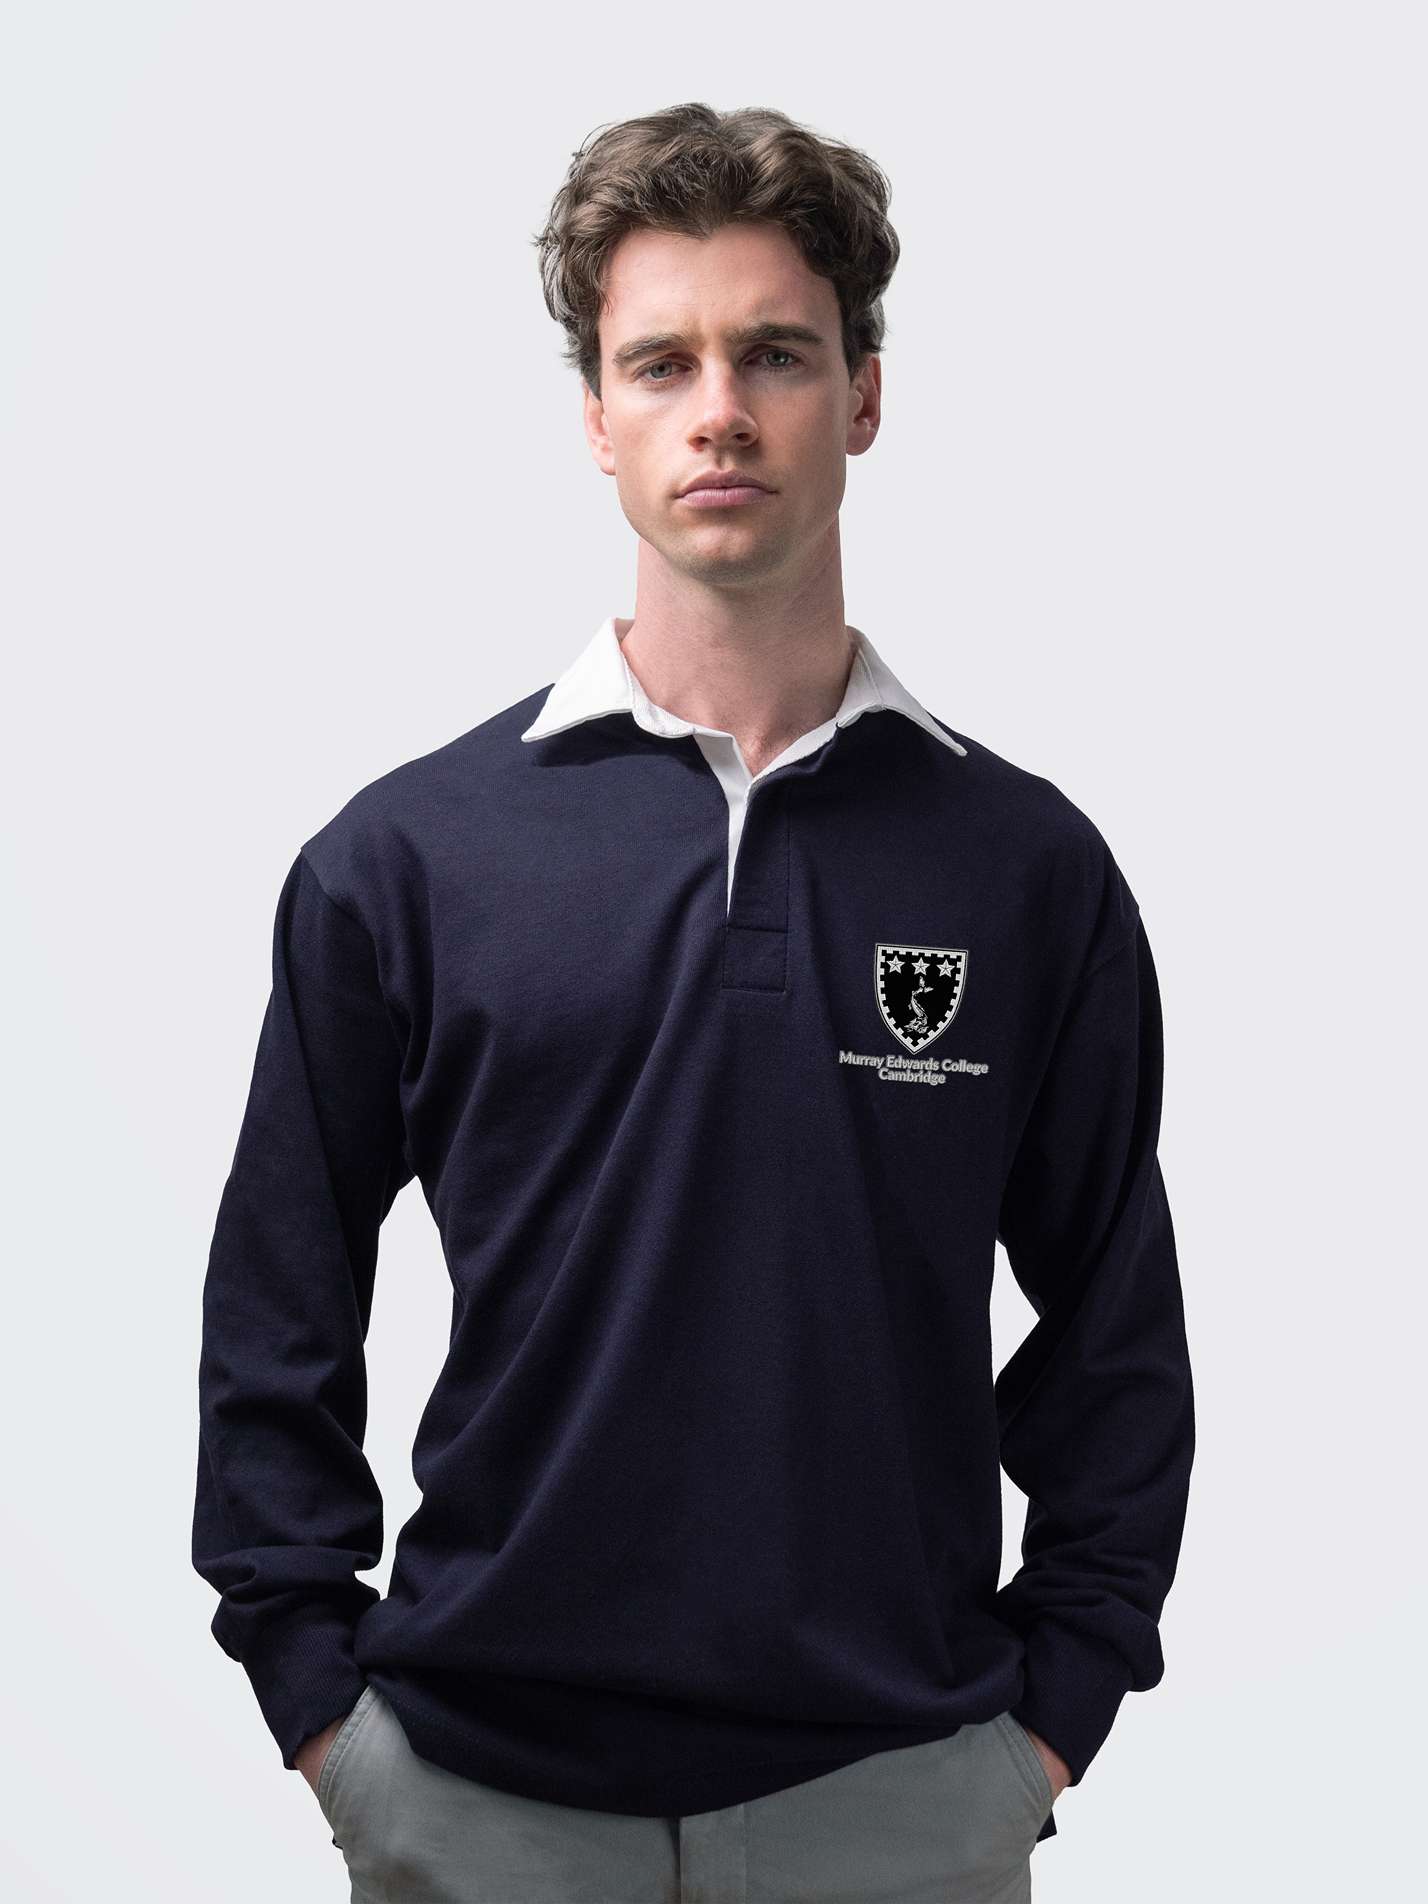 Murray Edwards student wearing an embroidered mens rugby shirt in navy